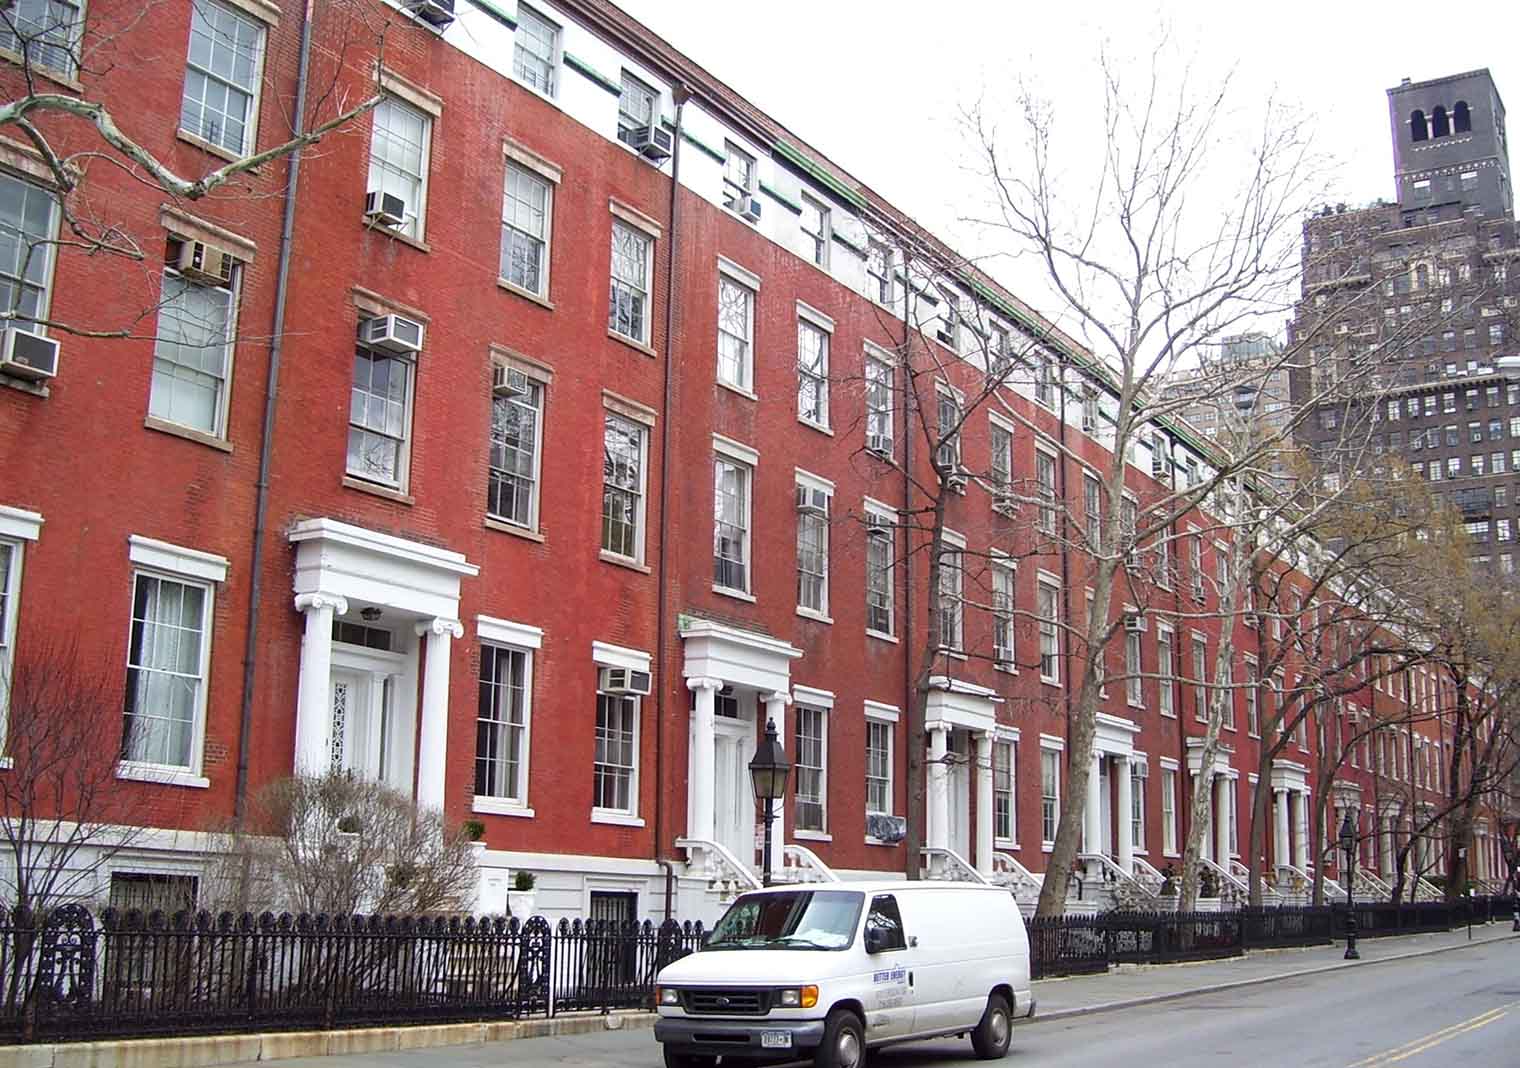 "The Row" of town houses at 1(right)-13(left) Washington Square North between Fifth Avenue and University Place in the Greenwich Village neighborhood of Manhattan, New York City, was built in 1832-33. Some of these (#7-13, nearest the camera) are only facades, having been gutted to make multiple-dwelling housing, with an entrance pergola facing Fifth Avenue. This is owned by New York University, and is sometimes referred to as "One-Half Fifth Avenue". Also #3 was given a new facade in 1884, designed by J.E. Terhune. "The Row" is part of the Greenwich Village Historic District. {Source: AIA Guide to NYC (4th ed.))